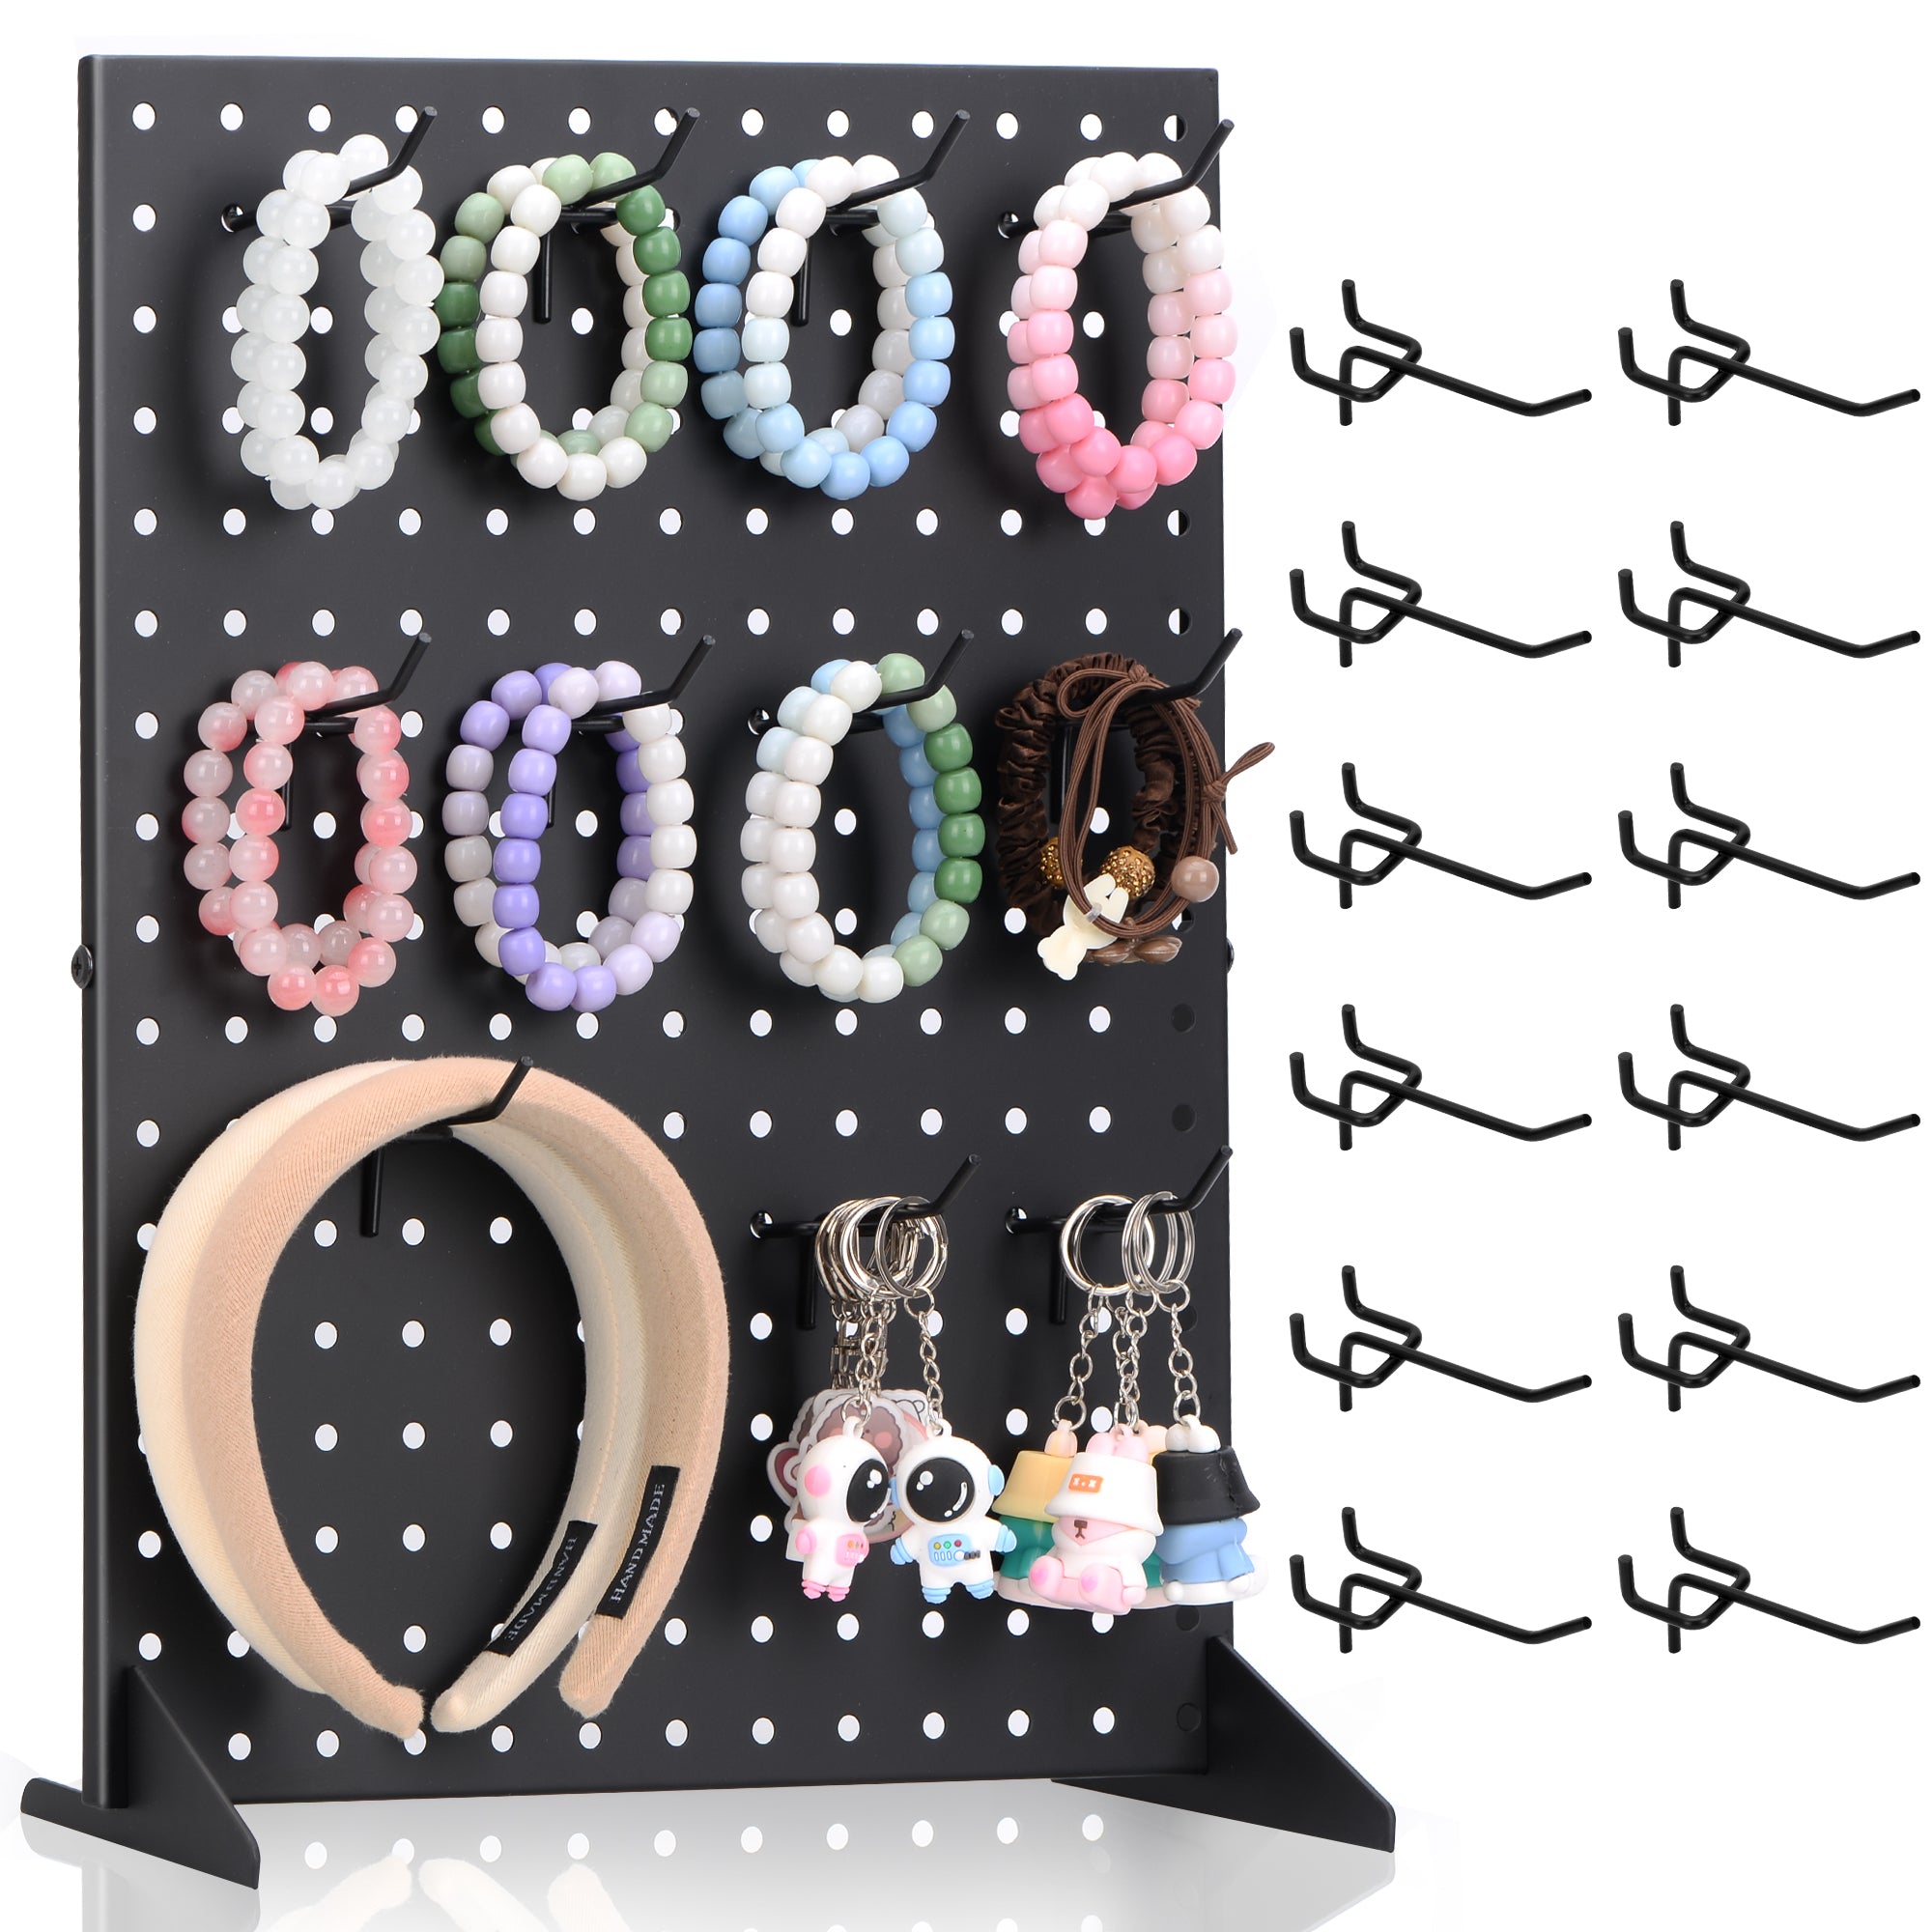 Jitnetiy Pegboard Display Stand Keychain Display With 12 Peg Hooks Wooden  Rotating Display Racks for Craft Shows Pin Jewelry Vendor Events Selling